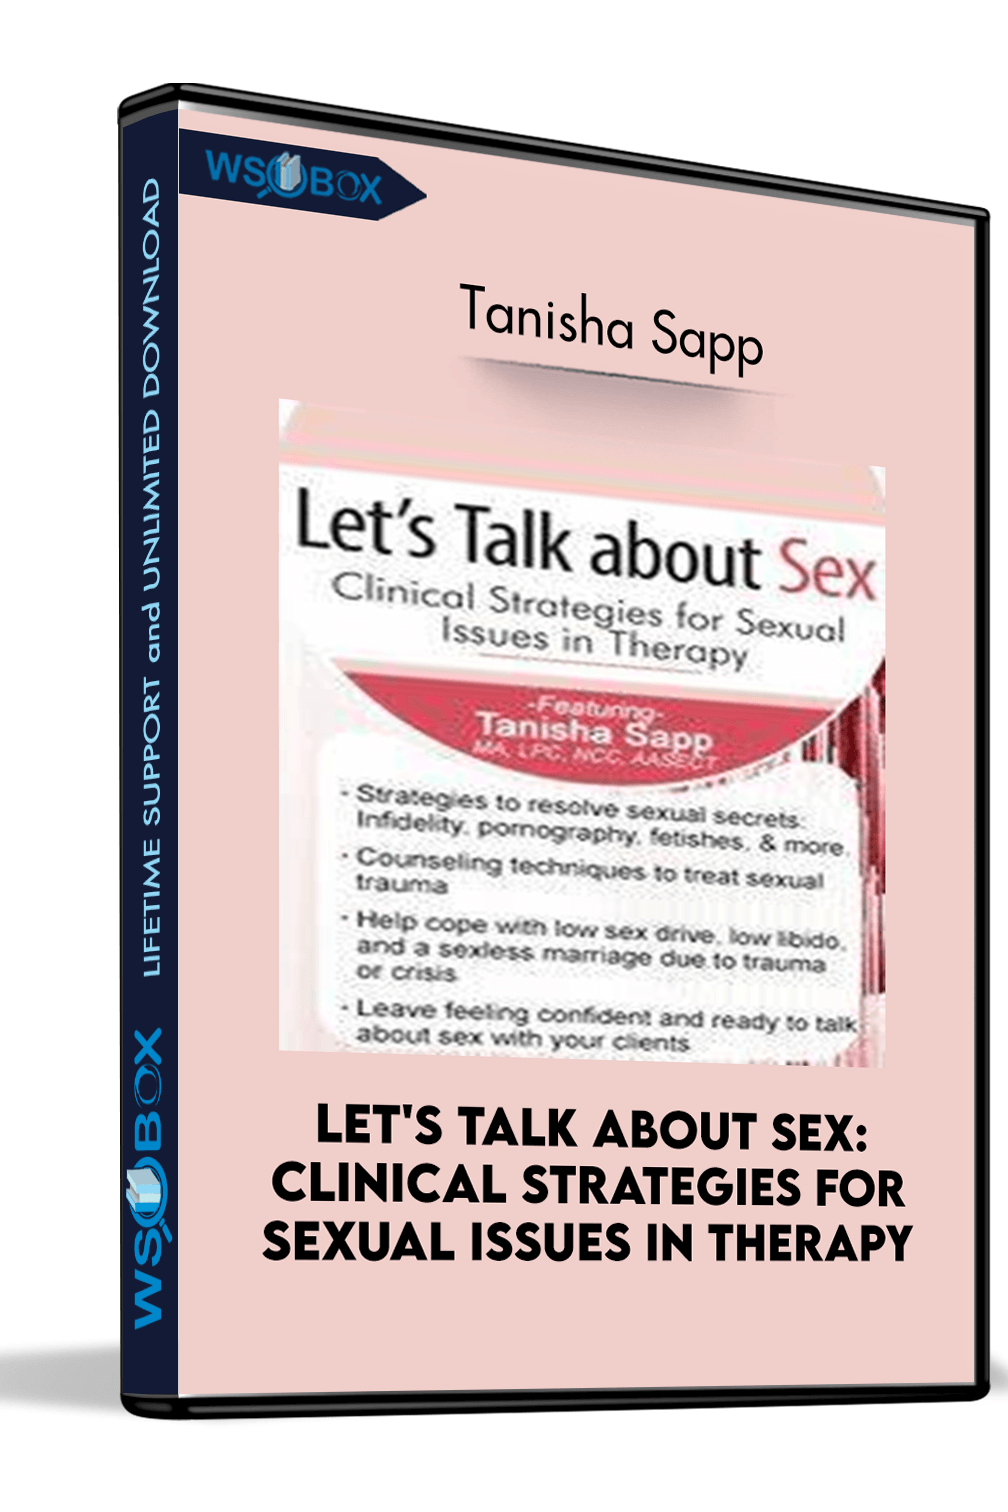 lets-talk-about-sex-clinical-strategies-for-sexual-issues-in-therapy-tanisha-sapp